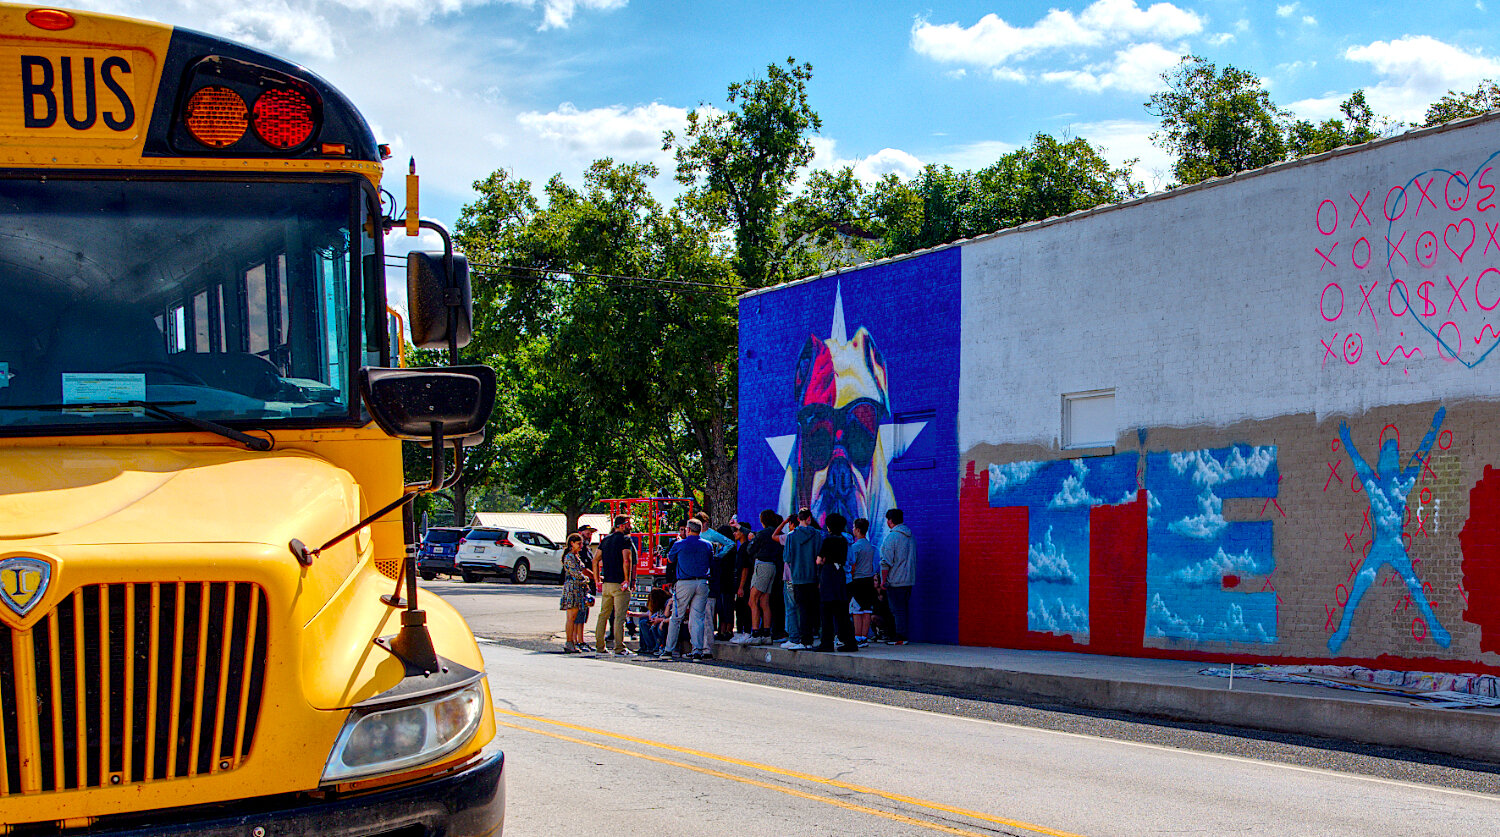 Quitman art students took a bus to the square downtown to learn from muralist Patrick McGregor, who created the art along the west-facing wall of Dani's Sidekick. [see the progression of murals]